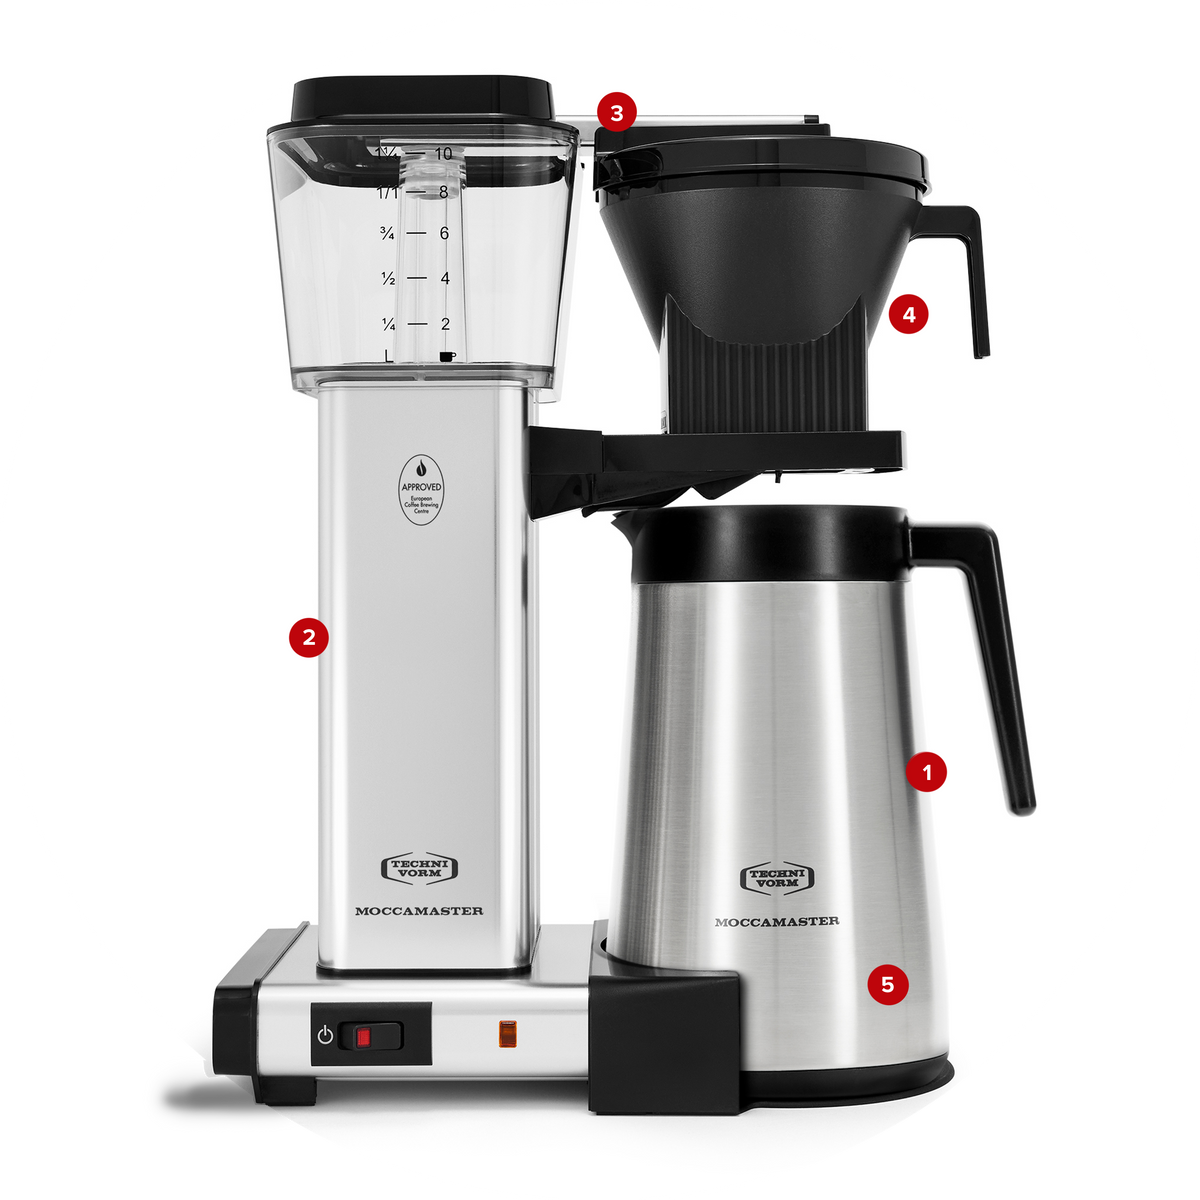 Coffee KBGT Drip-Stop Moccamaster Pour Brewer - USA Automatic Moccamaster Maker: Over